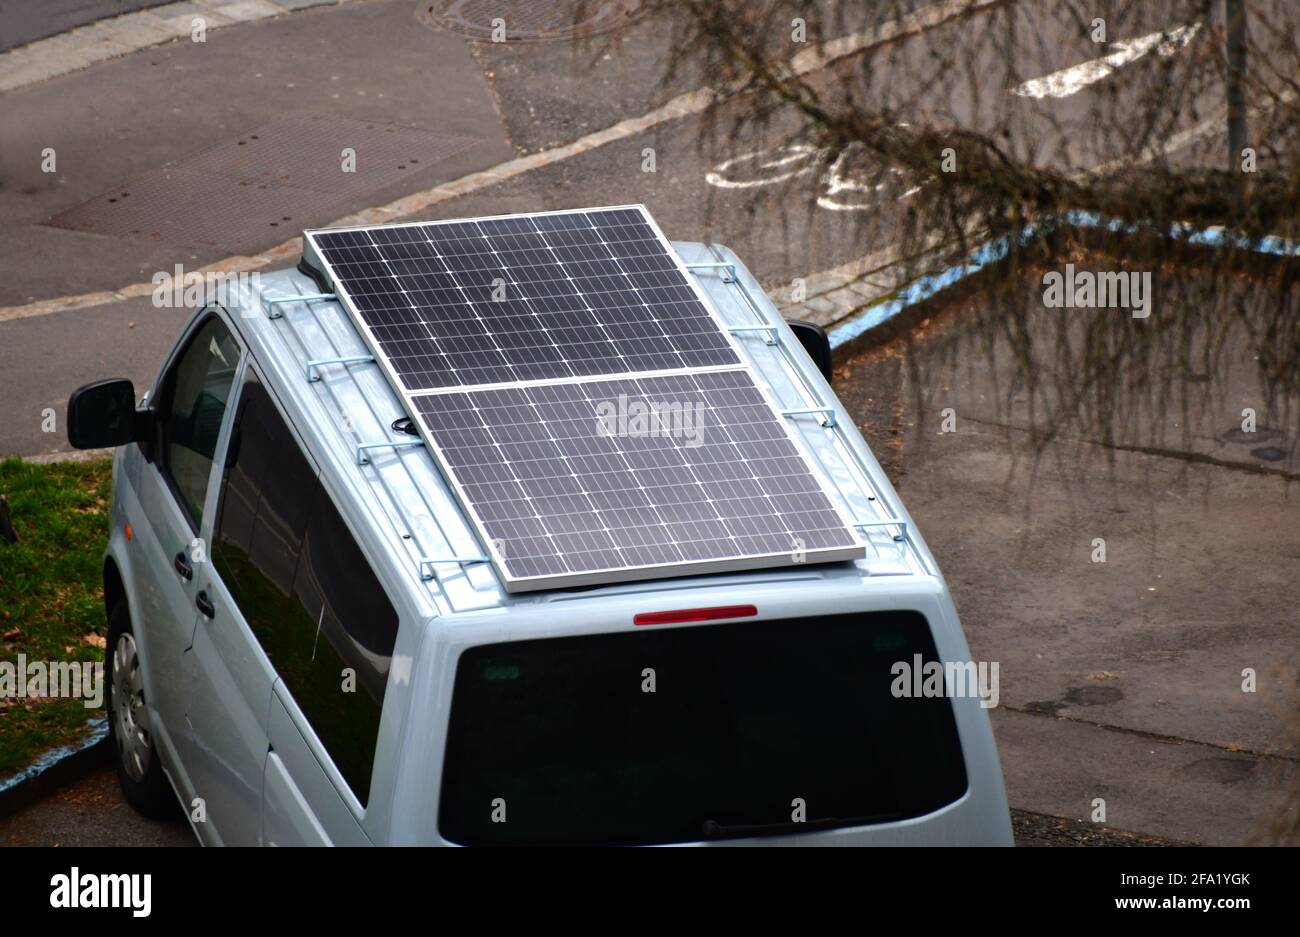 A VW Volkswagen Van with a solar panel on the roof. Austria, Europe Stock Photo